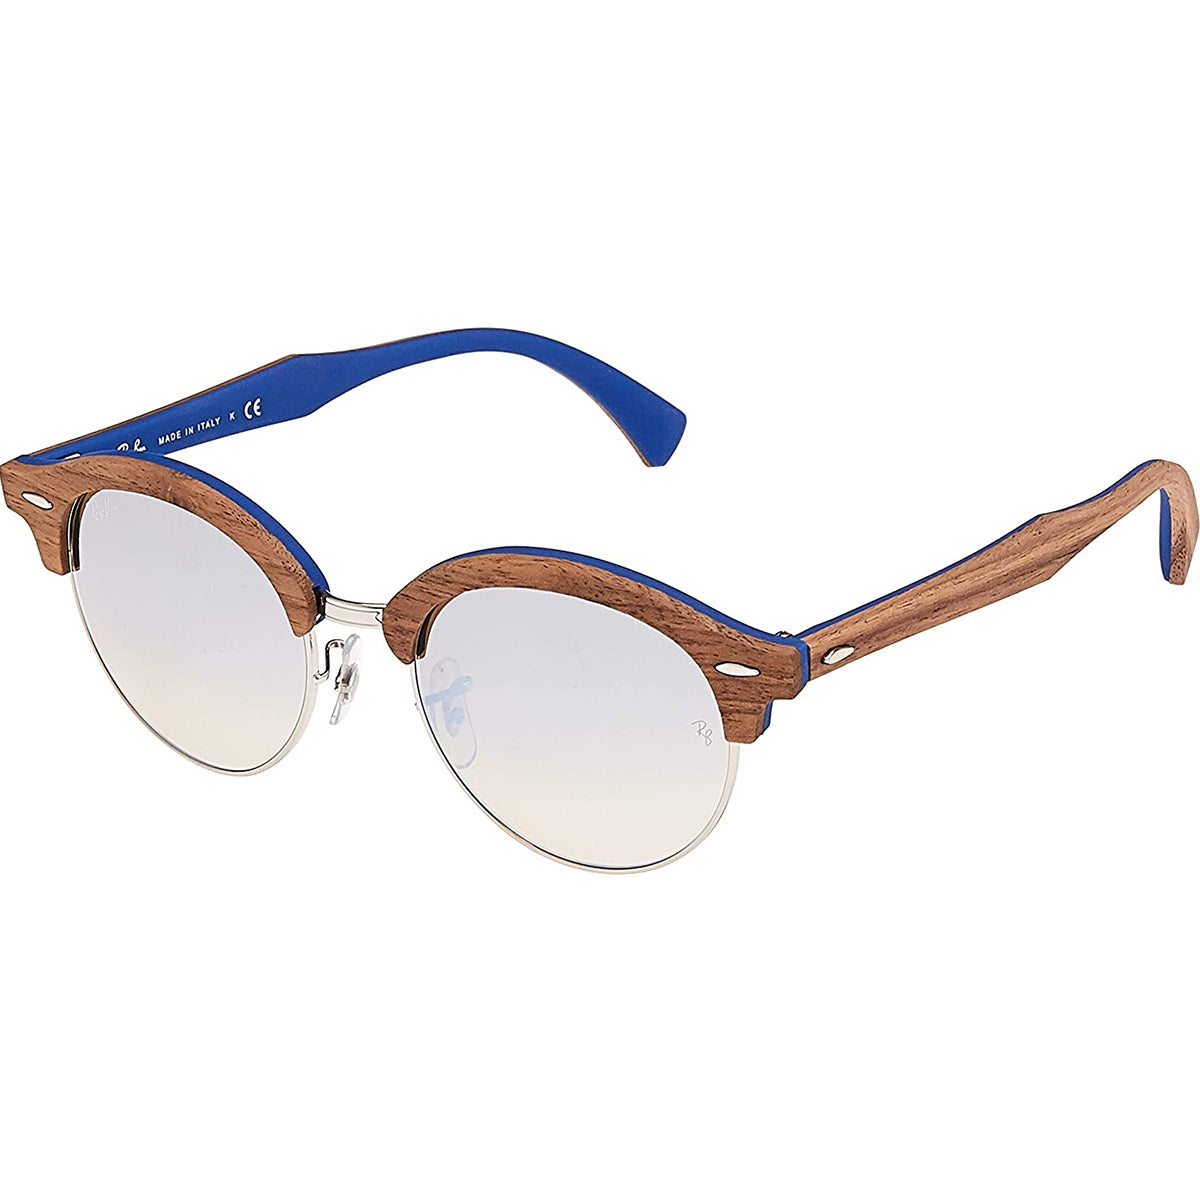 Ray-Ban Clubround Wood Men's Lifestyle Sunglasses-0RB4246M